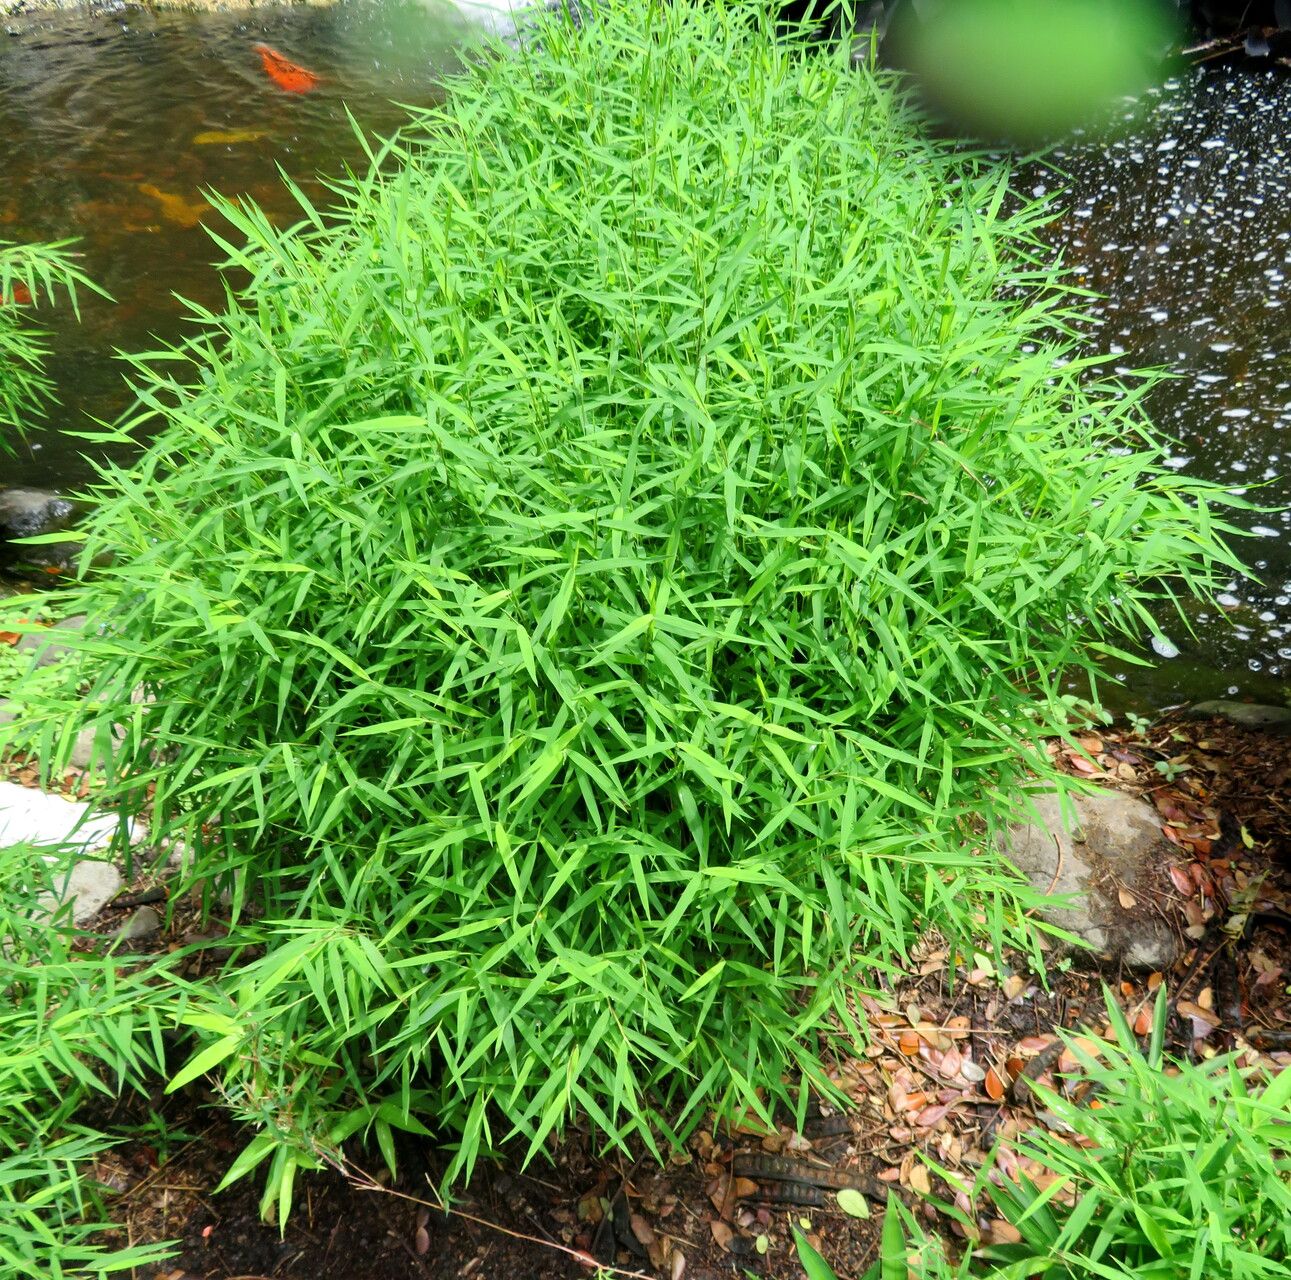 Photograph showing baby bamboo grass grown as a decorative plant. The photo shows a clump of baby bamboo grass growing next to a pond.